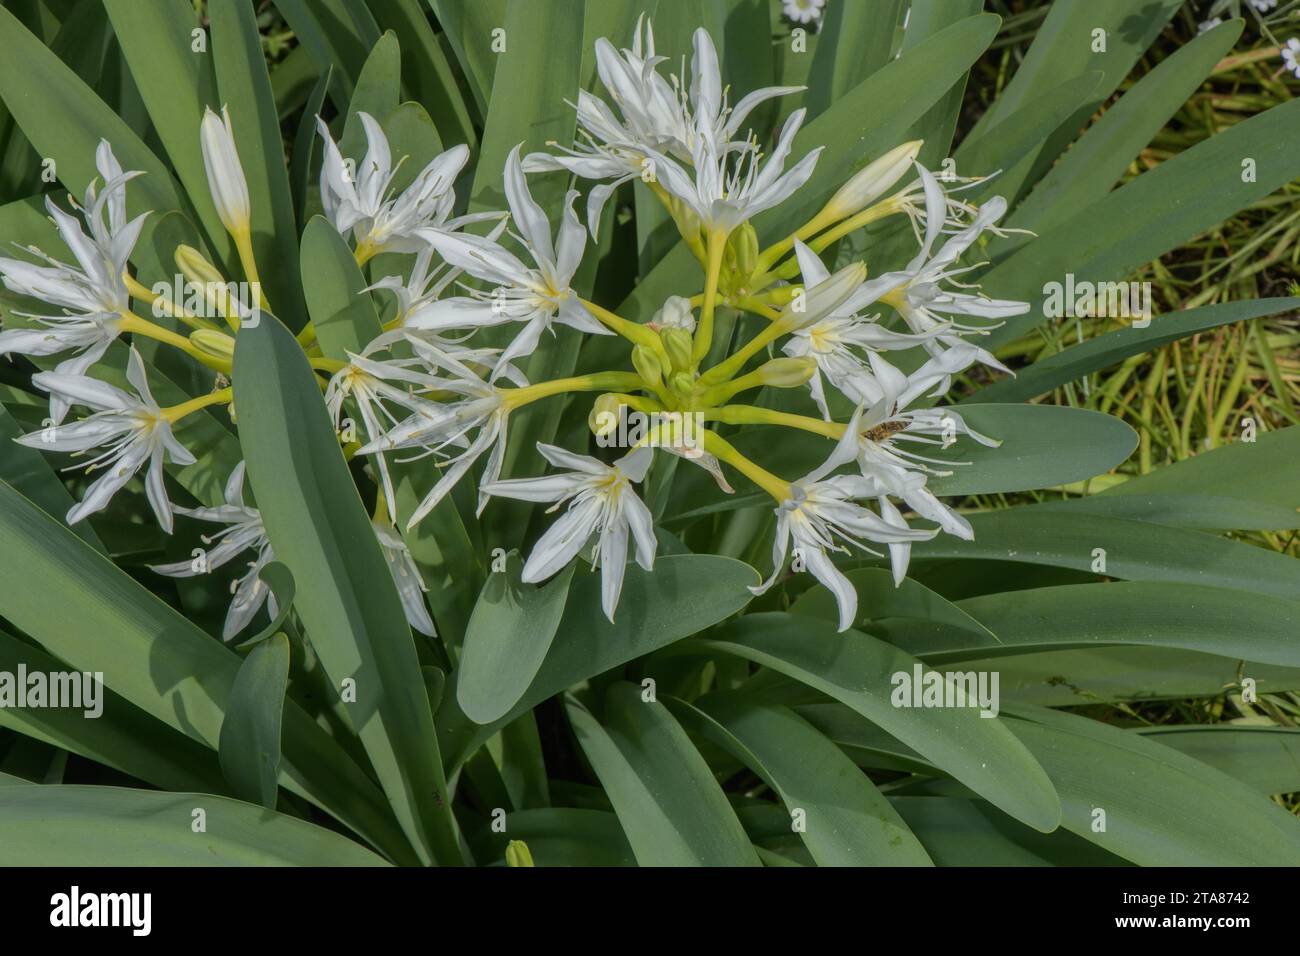 Illyrian Sea Lily, Pancratium illyricum in flower in spring. Endemic to Corsica and Sardinia. Stock Photo